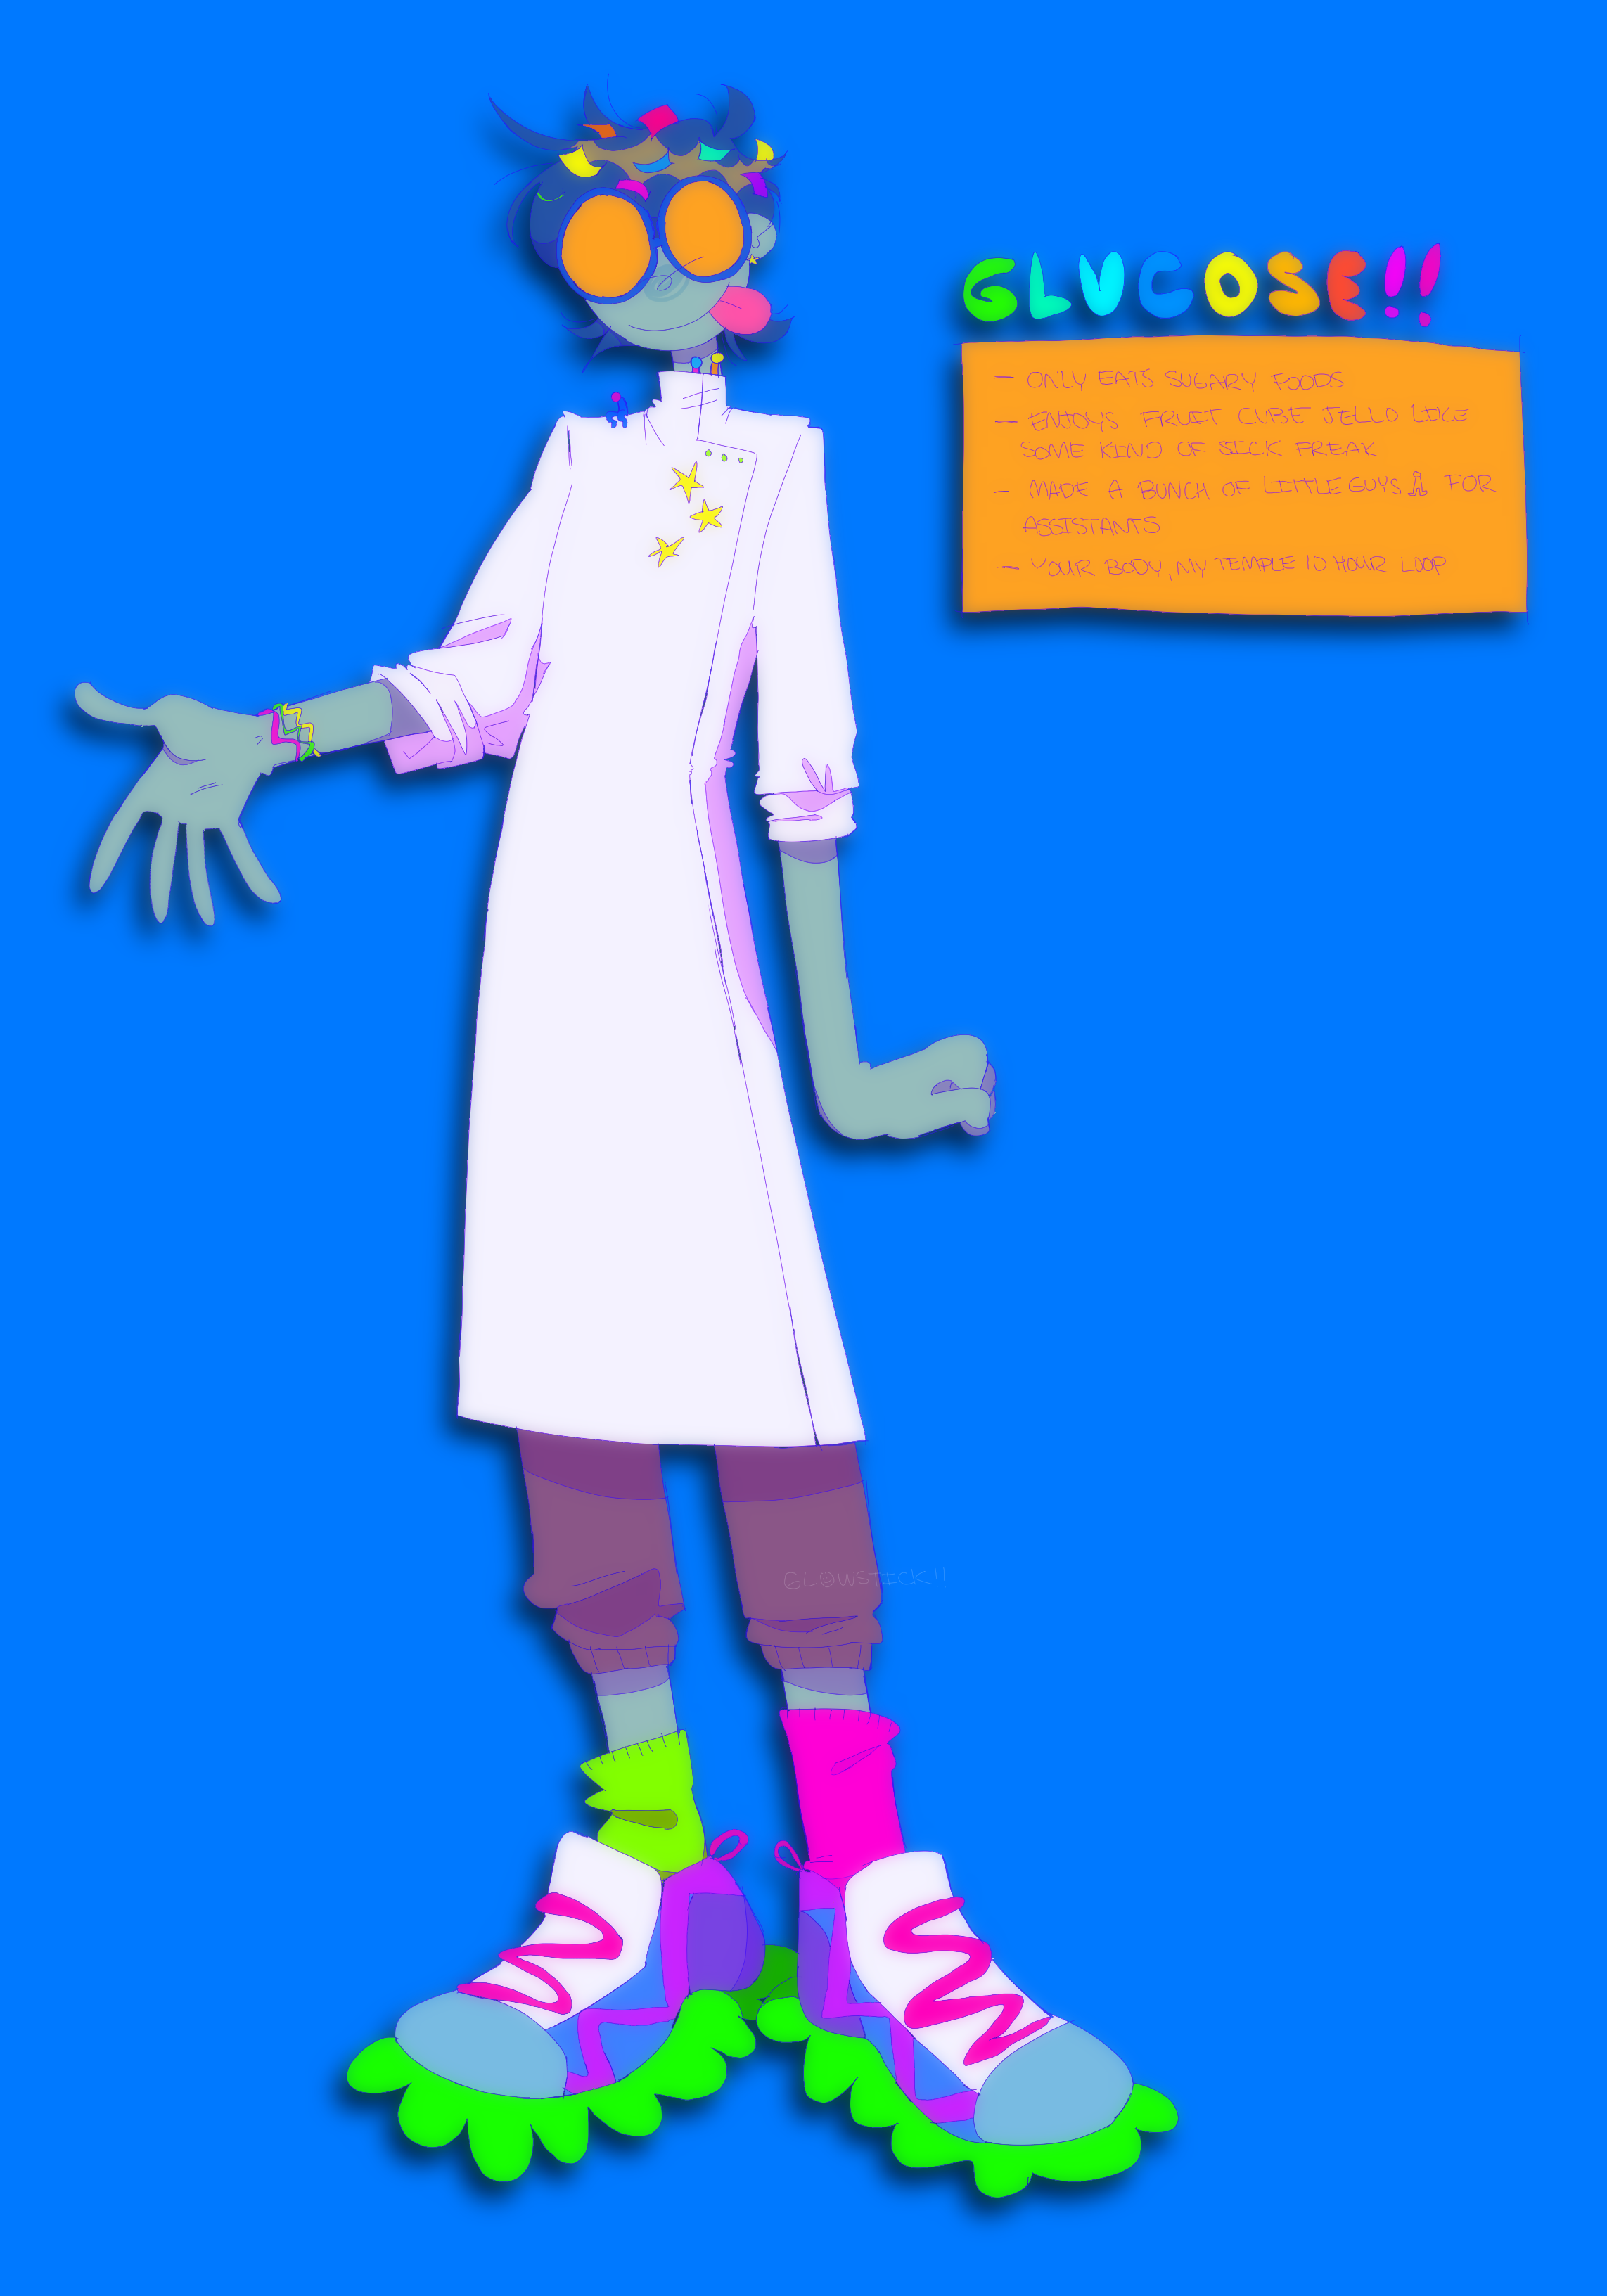 A fullbody reference of a lanky, teal-skinned, blue-haired character. He's wearing a labcoat with star stickers, colorful sneakers, and yellow glasses. Tiny stickmen are poking out of his collar. The text box next to him has the word 'GLUCOSE!' written out in big, rainbow block letters above it, and reads, '-Only eats sugary foods / -Enjoys fruit cube jello like some kind of sick freak / -Made a bunch of little guys for assistants / -Your body, my temple 10 hour loop'.